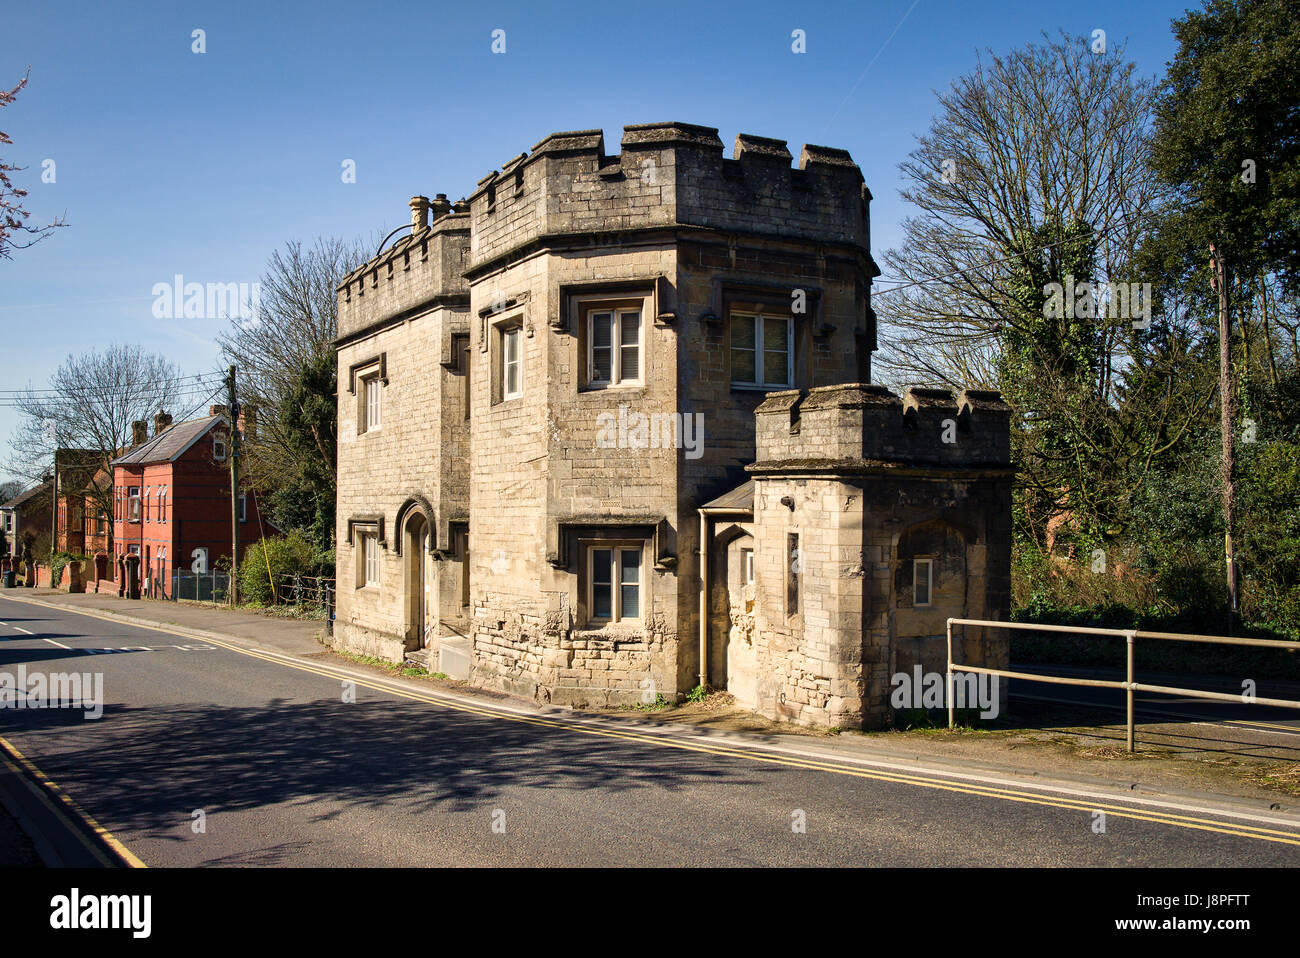 Shane's Castle on the Bath Road Devizes Wiltshire. A former toll house. Stock Photo